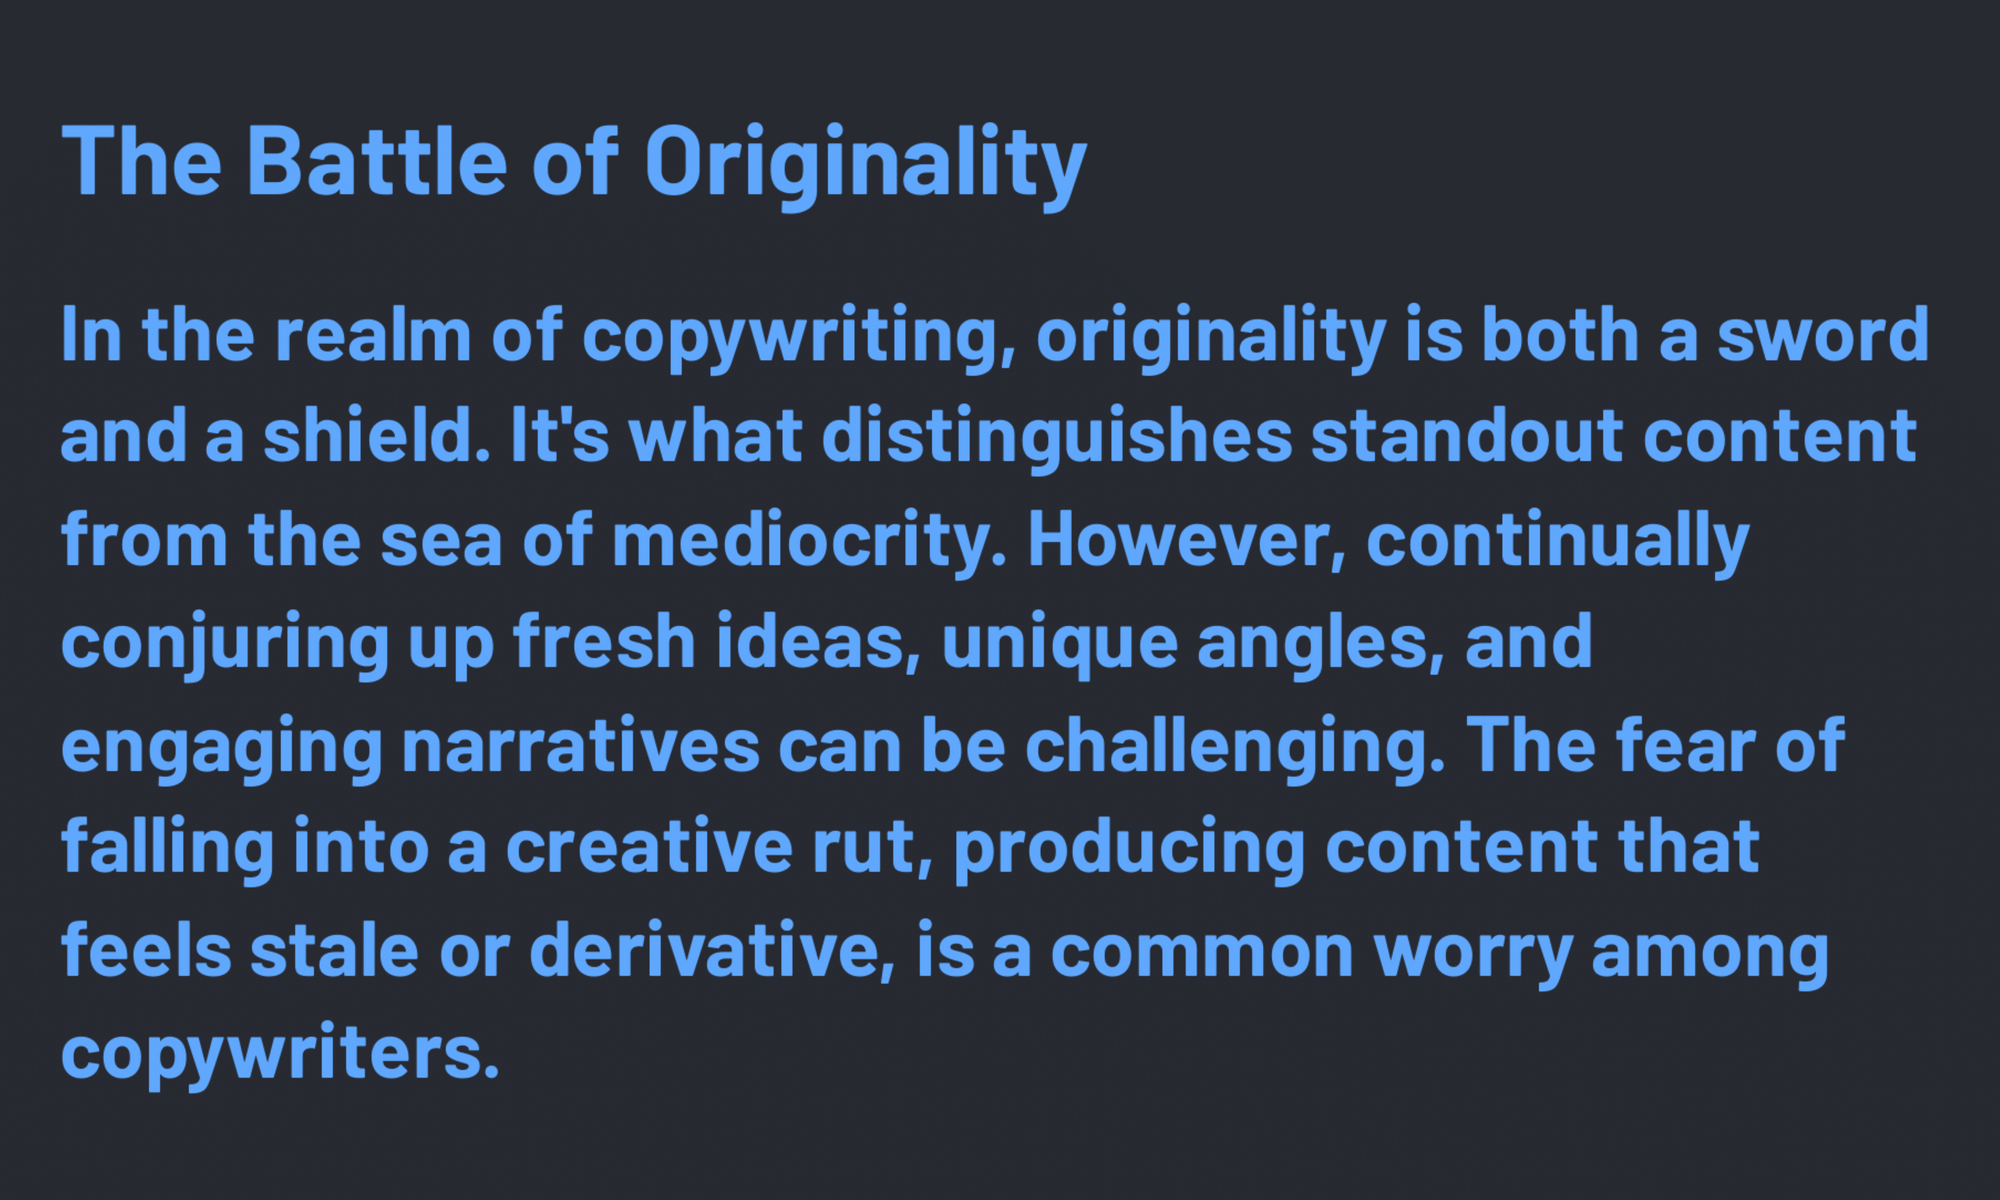 Denoting the struggle for originality in writing or creative work.